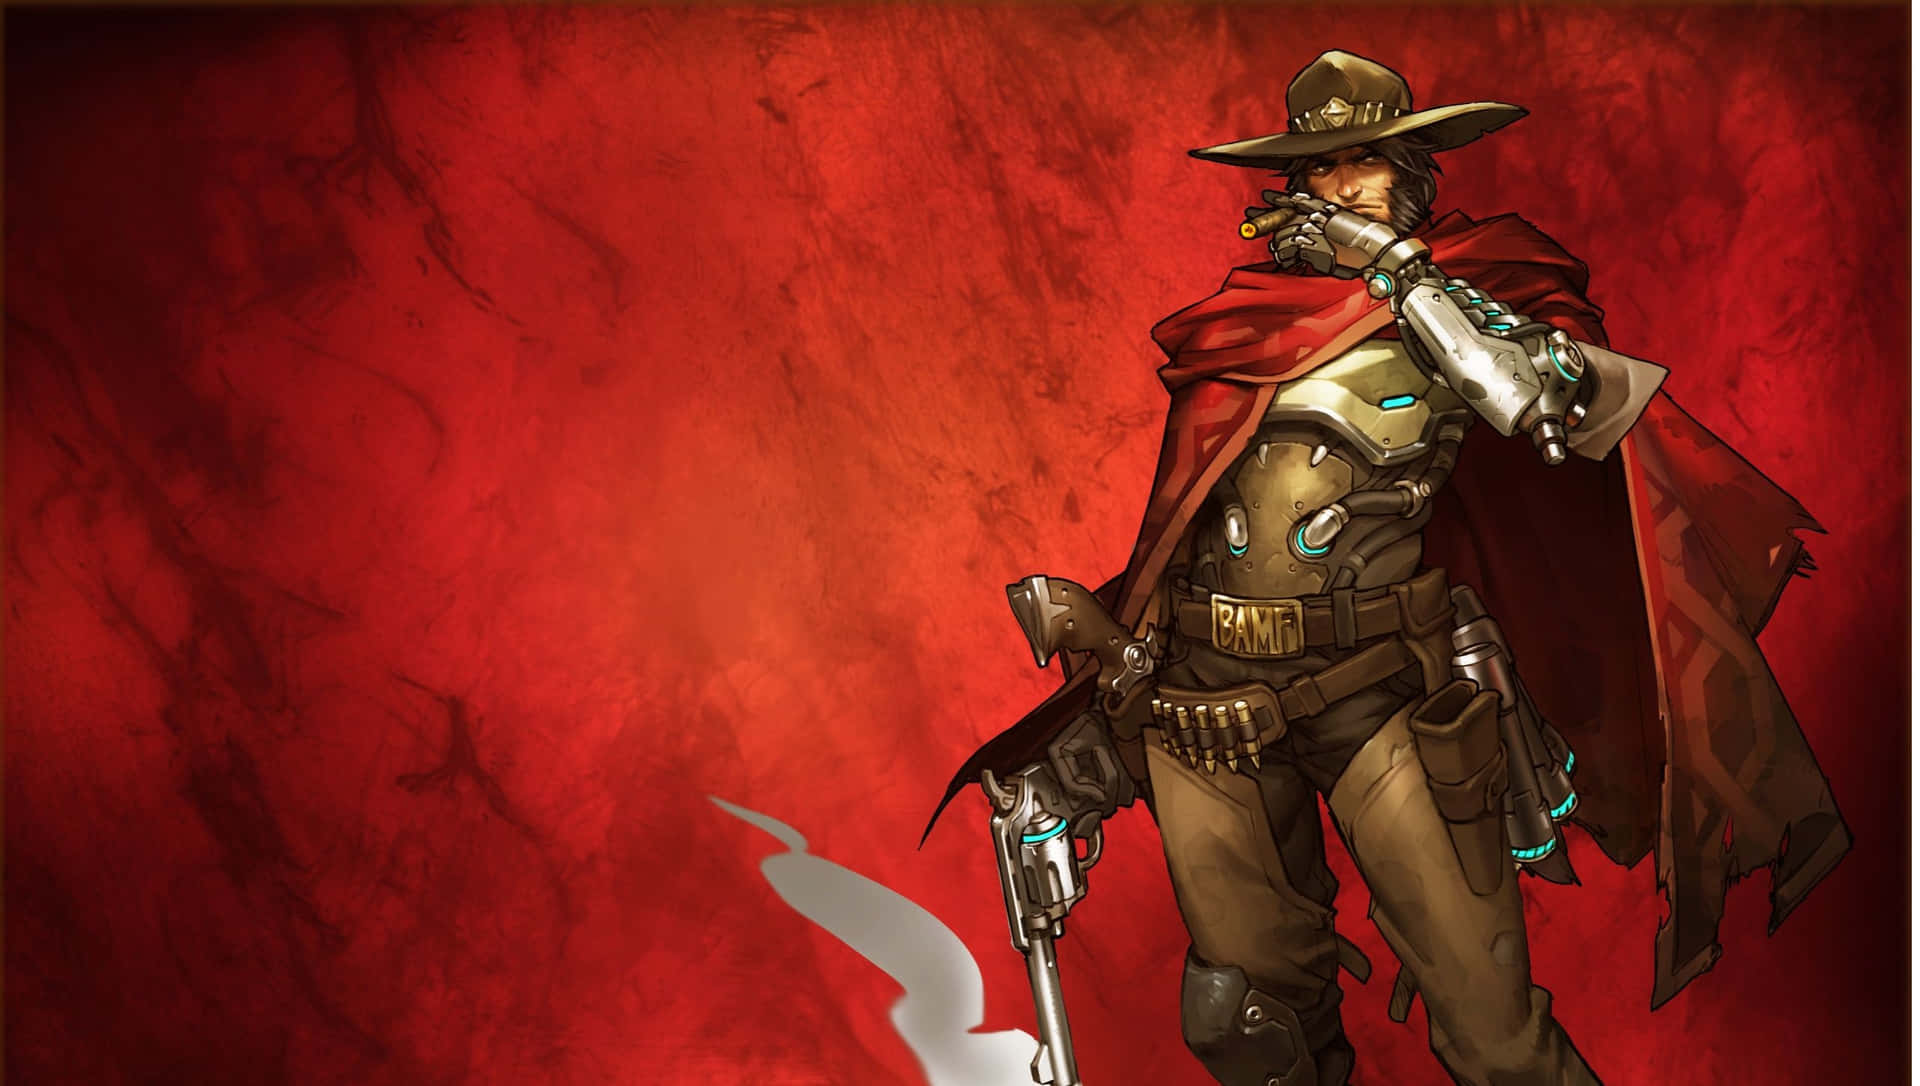 Mccree, the Sharpshooter from Overwatch Wallpaper